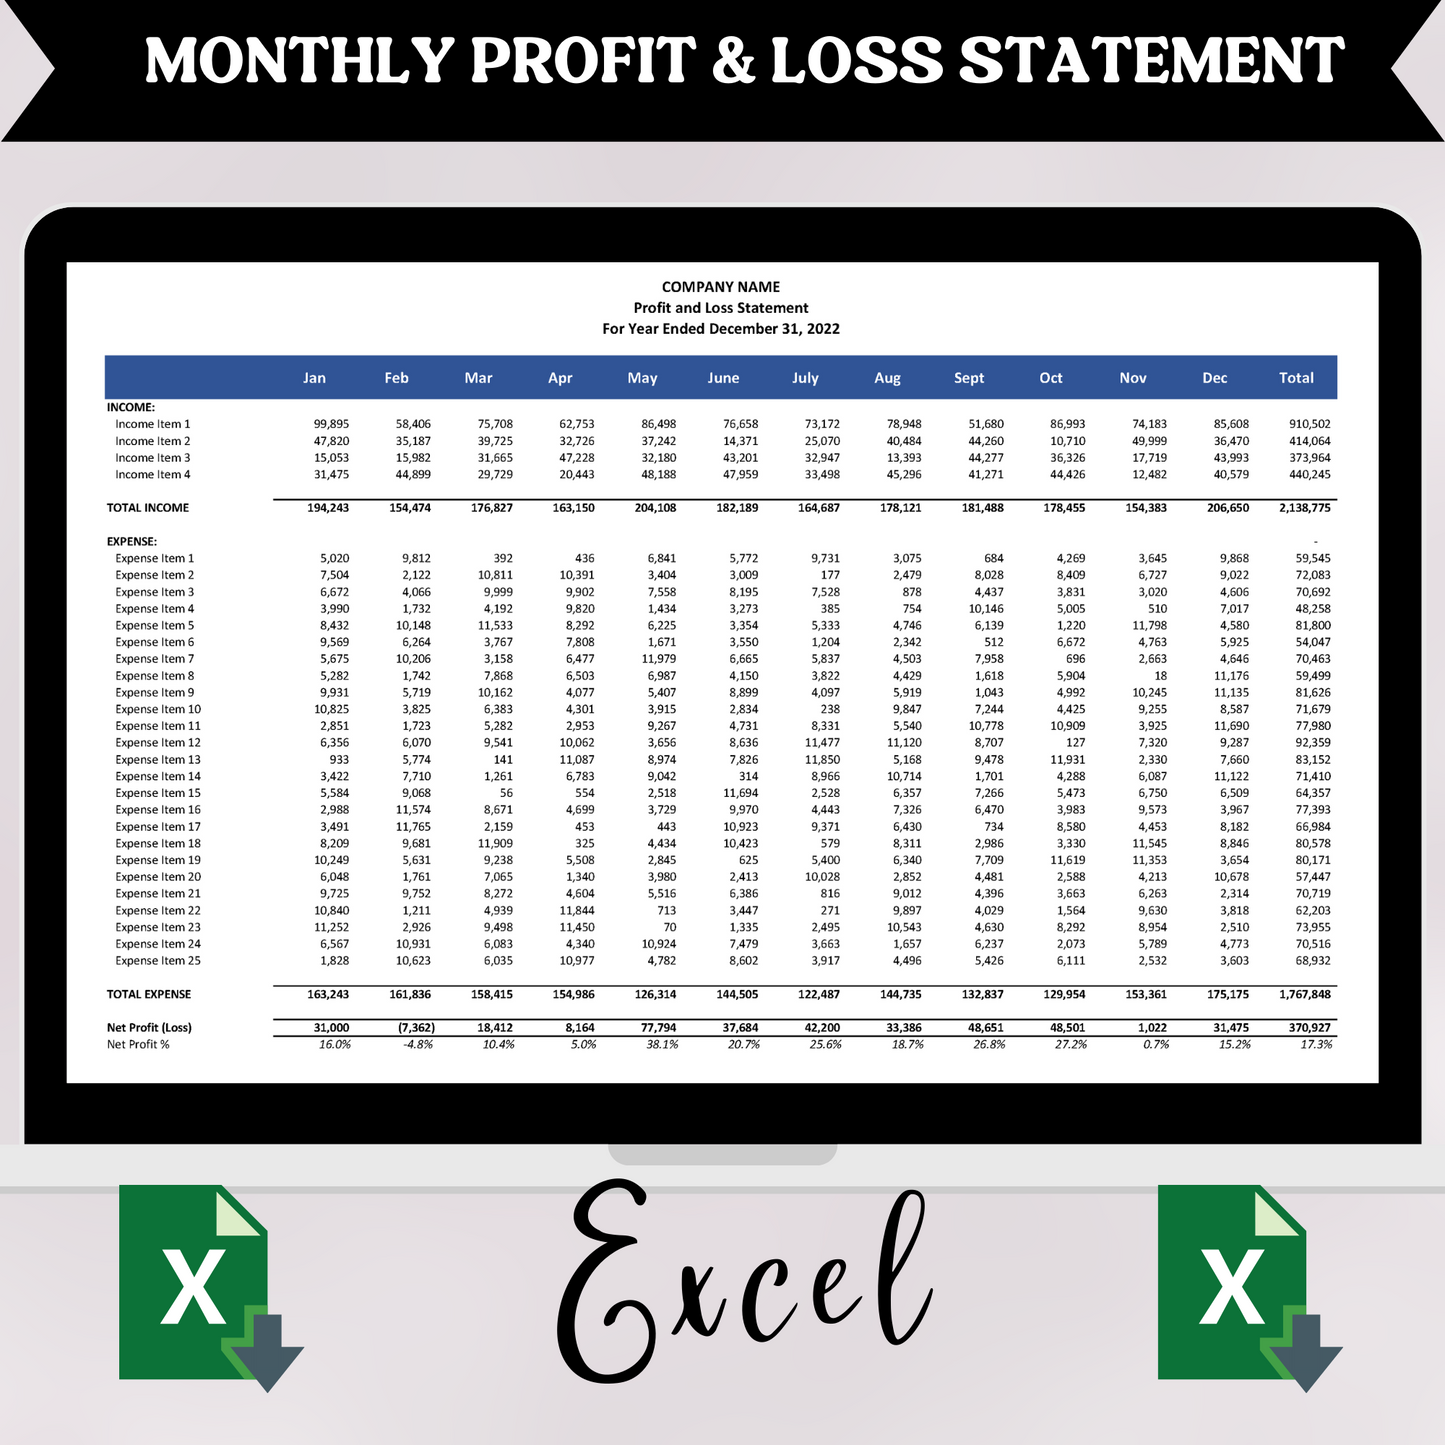 Monthly Profit & Loss